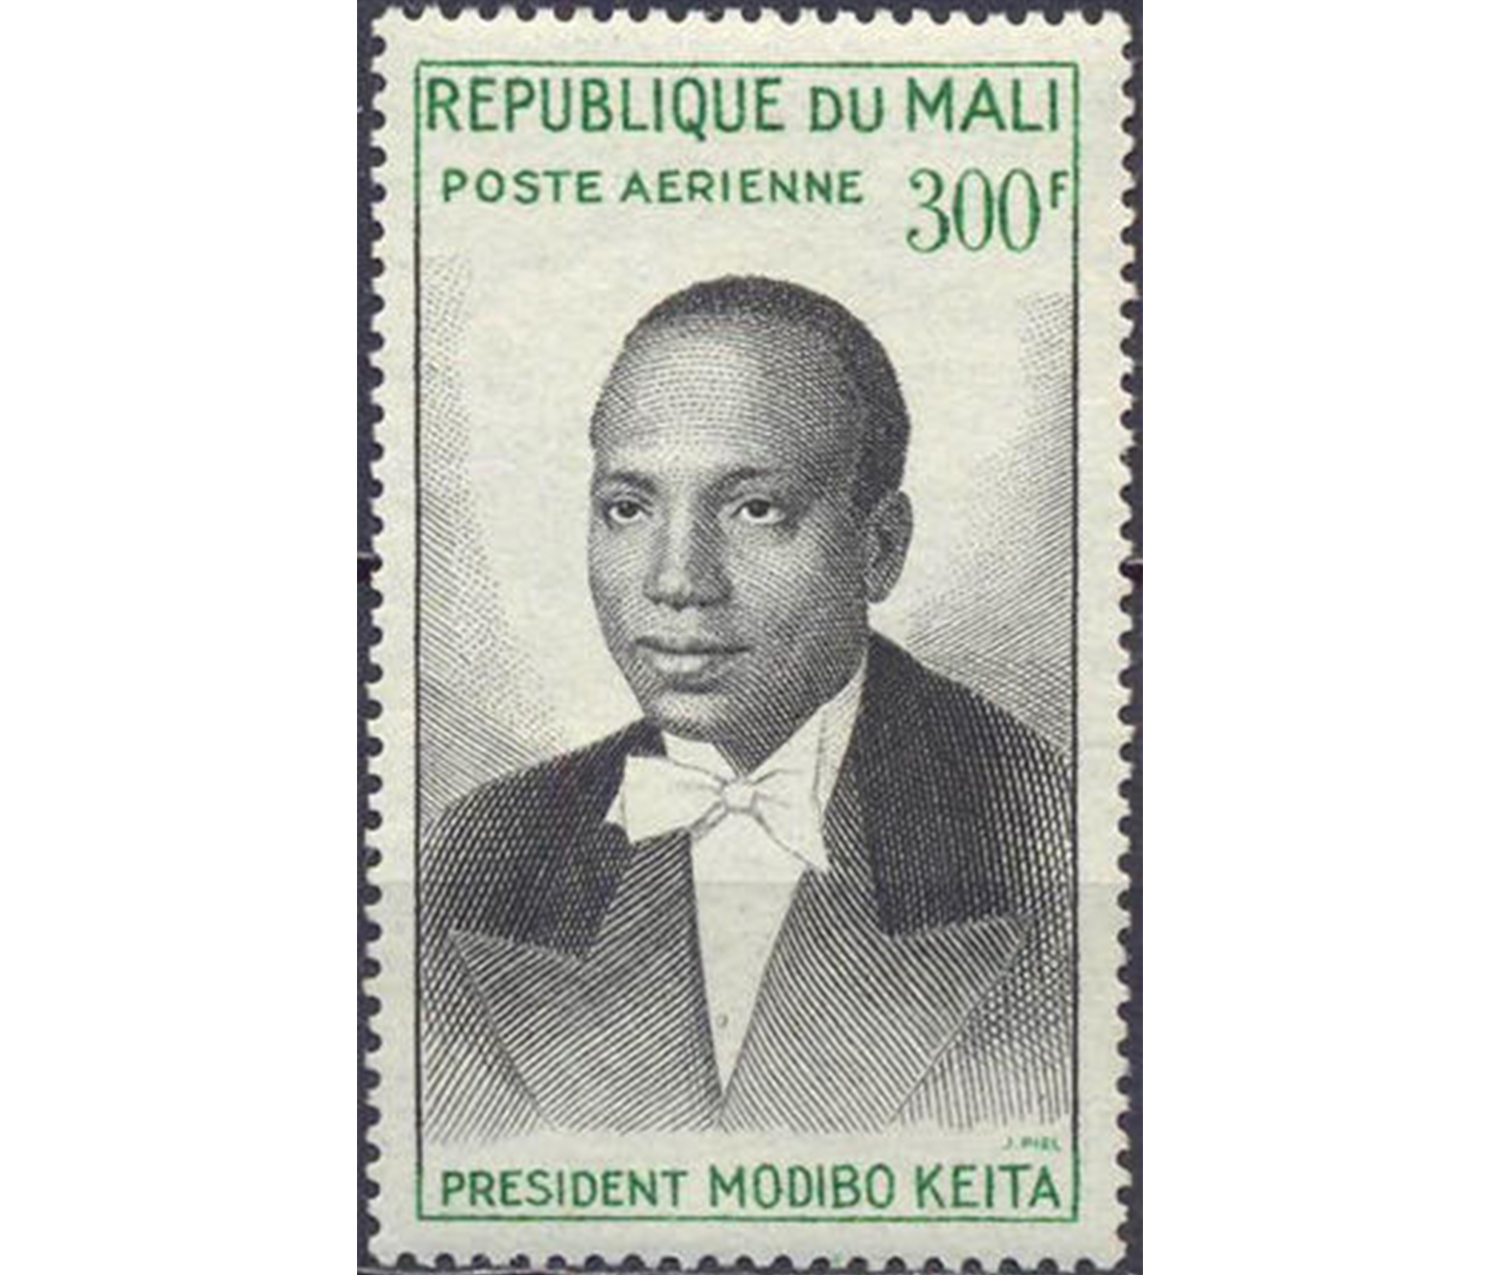 mail stamp showing a bust portrait of a man wearing a tuxedo. green text at the top reads, "REPUBLIQUE DU MALI / POSTE AERIENNE 300 F". green text at the bottom reads, "PRESIDENT MODIBO KEITA"